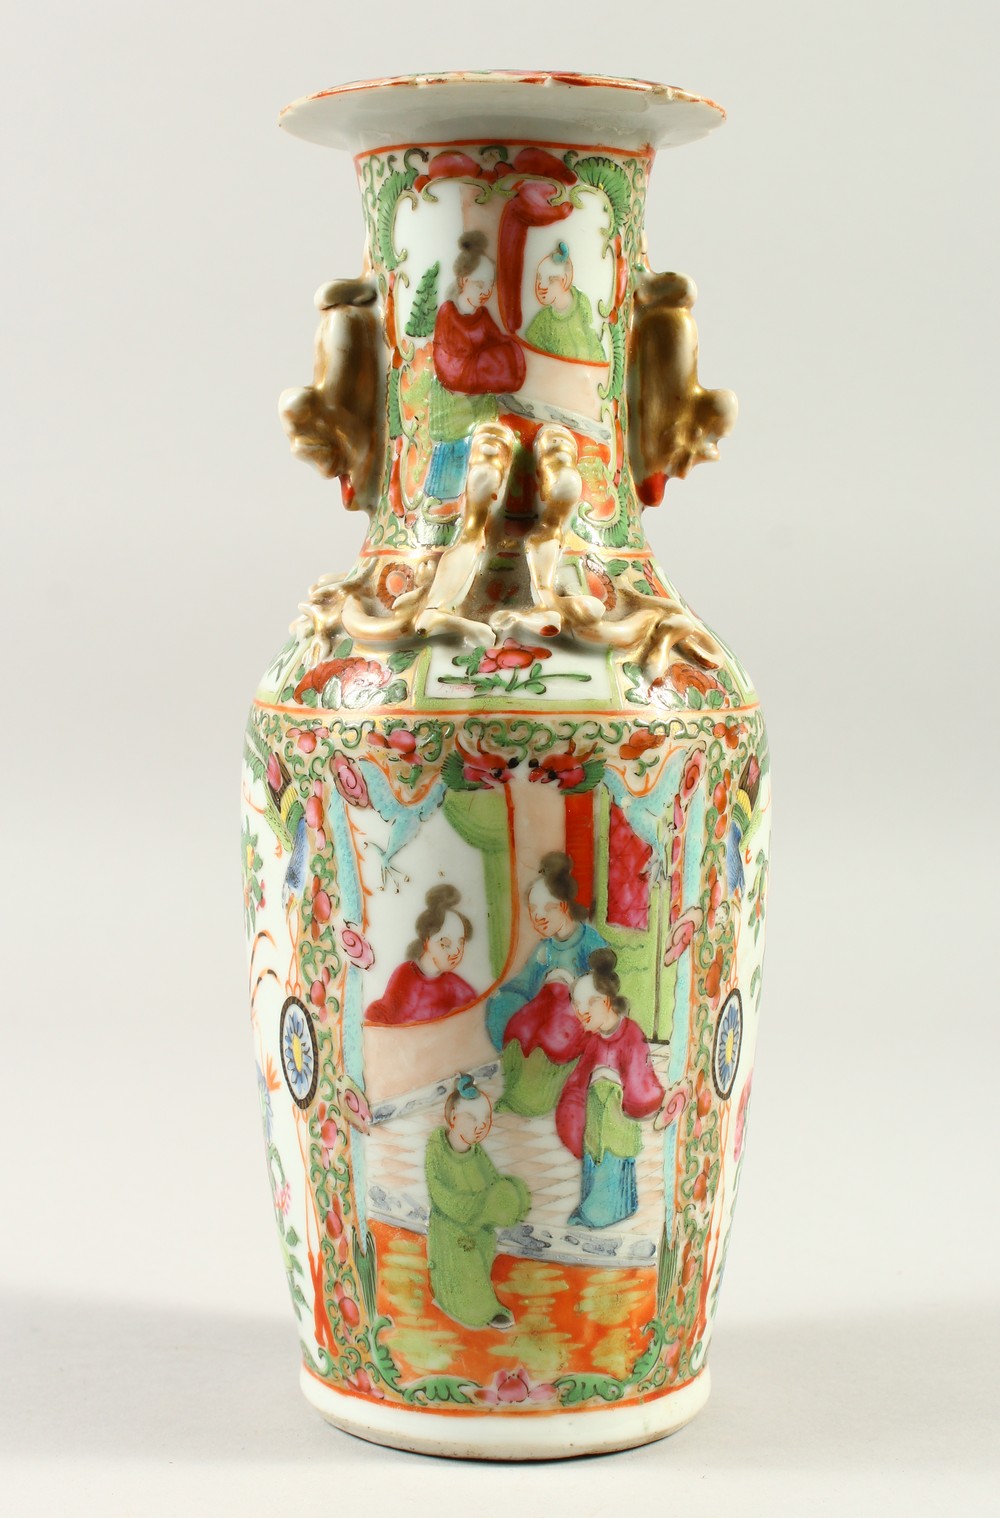 A 19TH CENTURY CHINESE CANTON PORCELAIN VASE, decorated with scenes of figures interior and floral